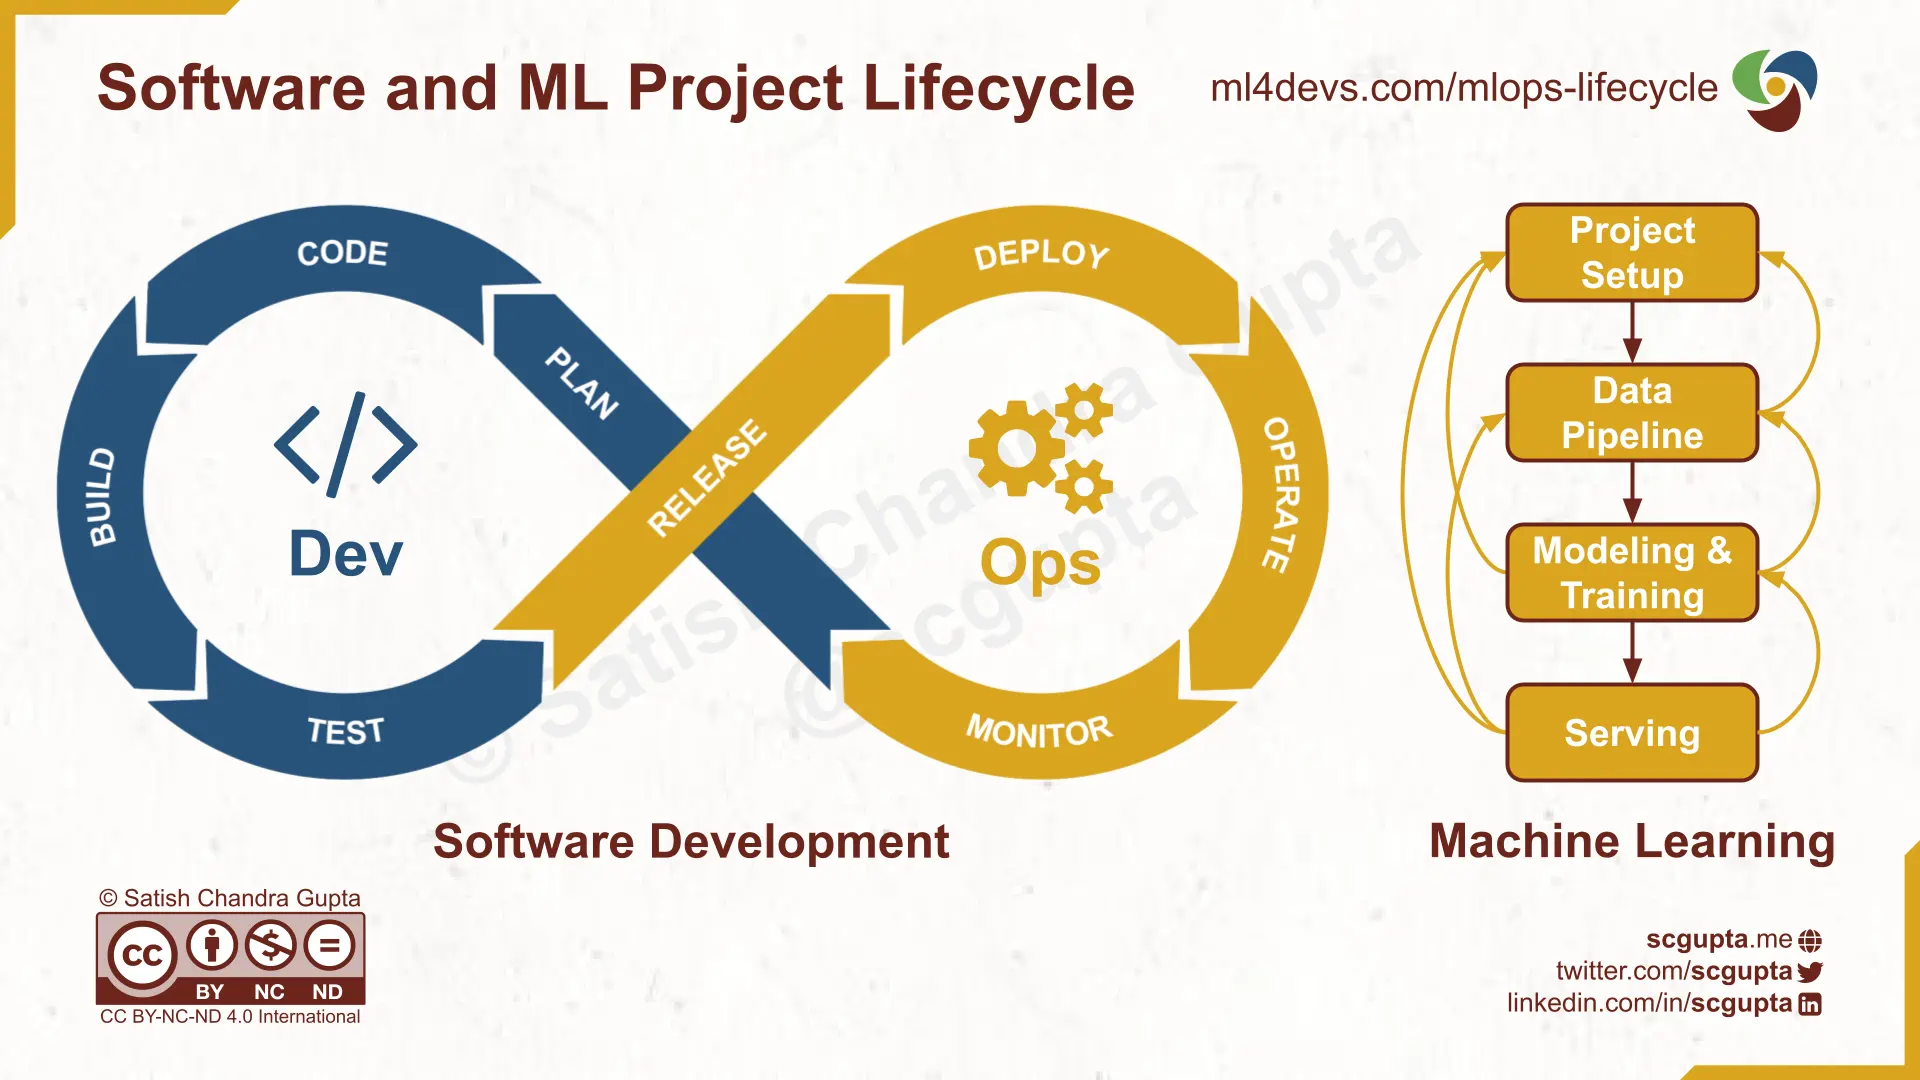 Traditional Software Engineering Lifecycle vs. ML Project Lifecycle